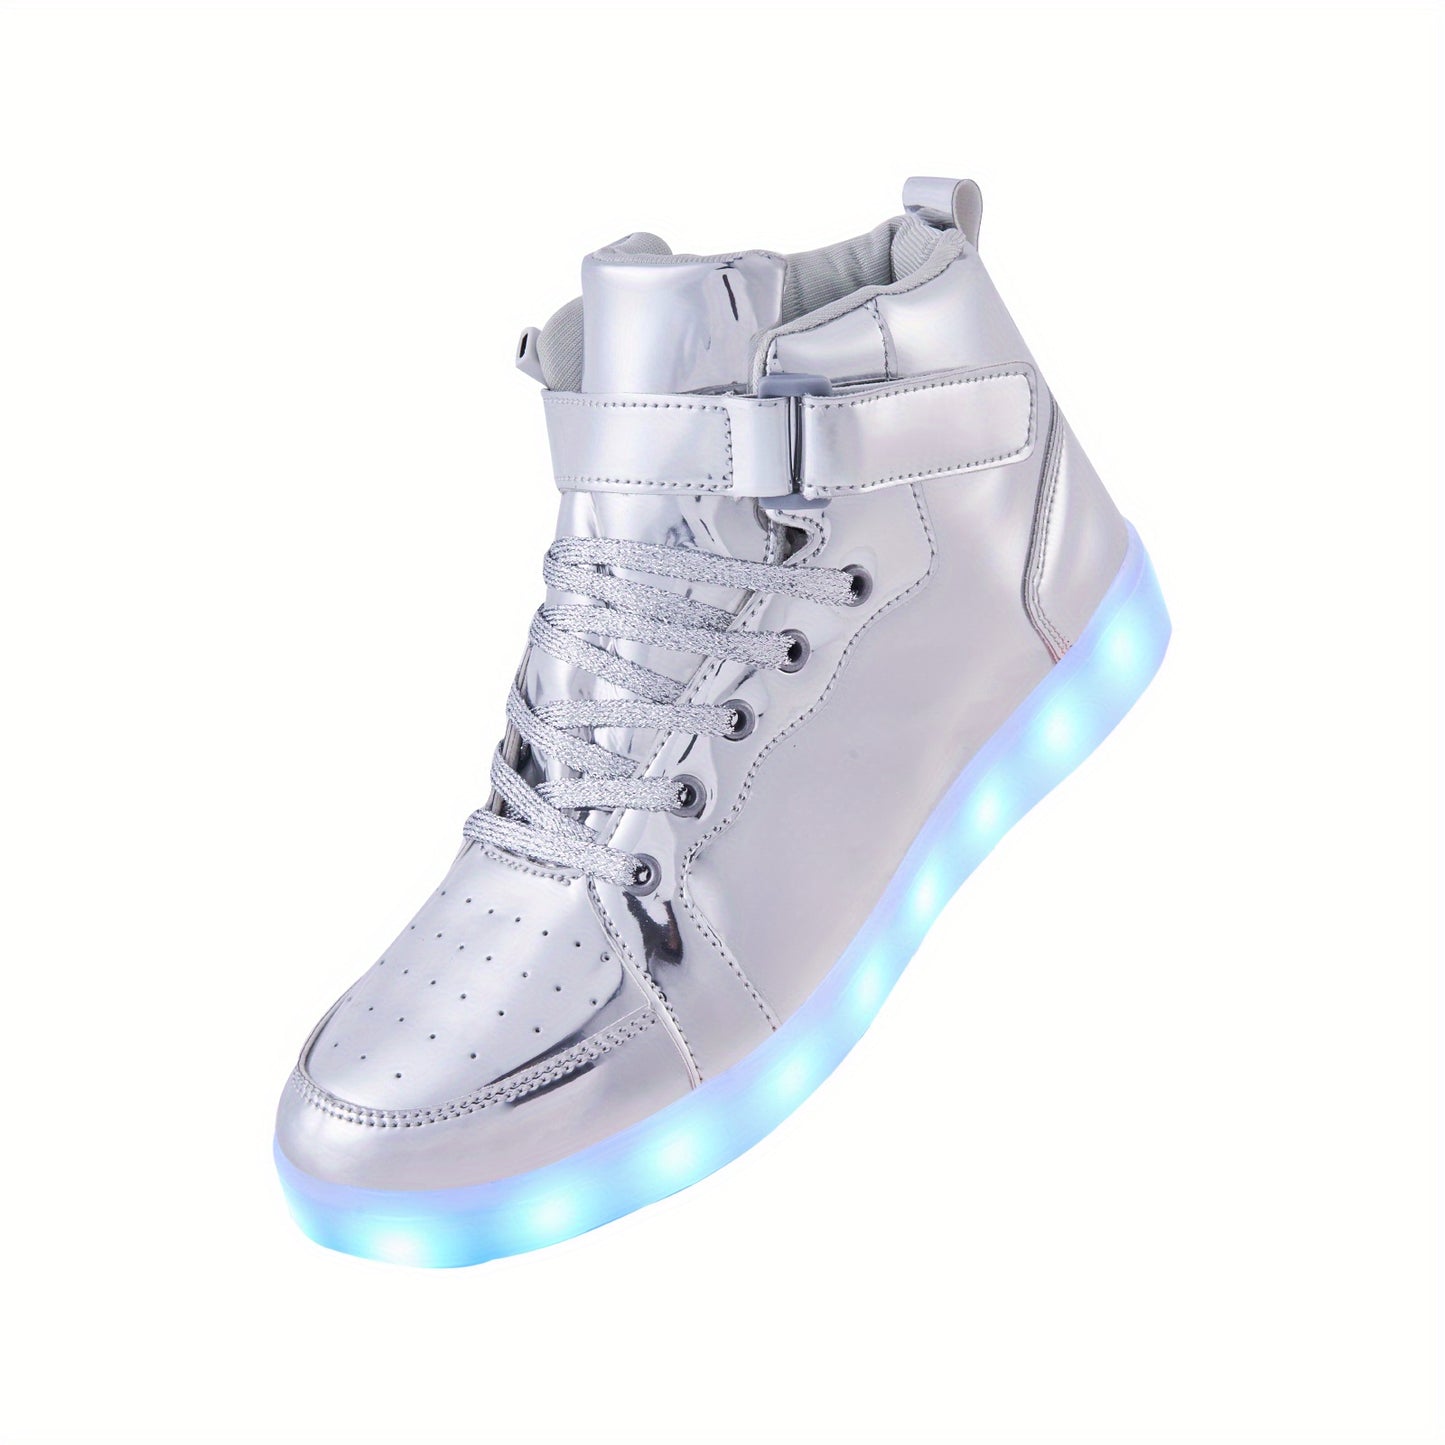 Men's Trendy Led Light Up HighTop Sneakers With Adjustable Hook & Loop Fastener, USB Charging Sneakers With Assorted Colors